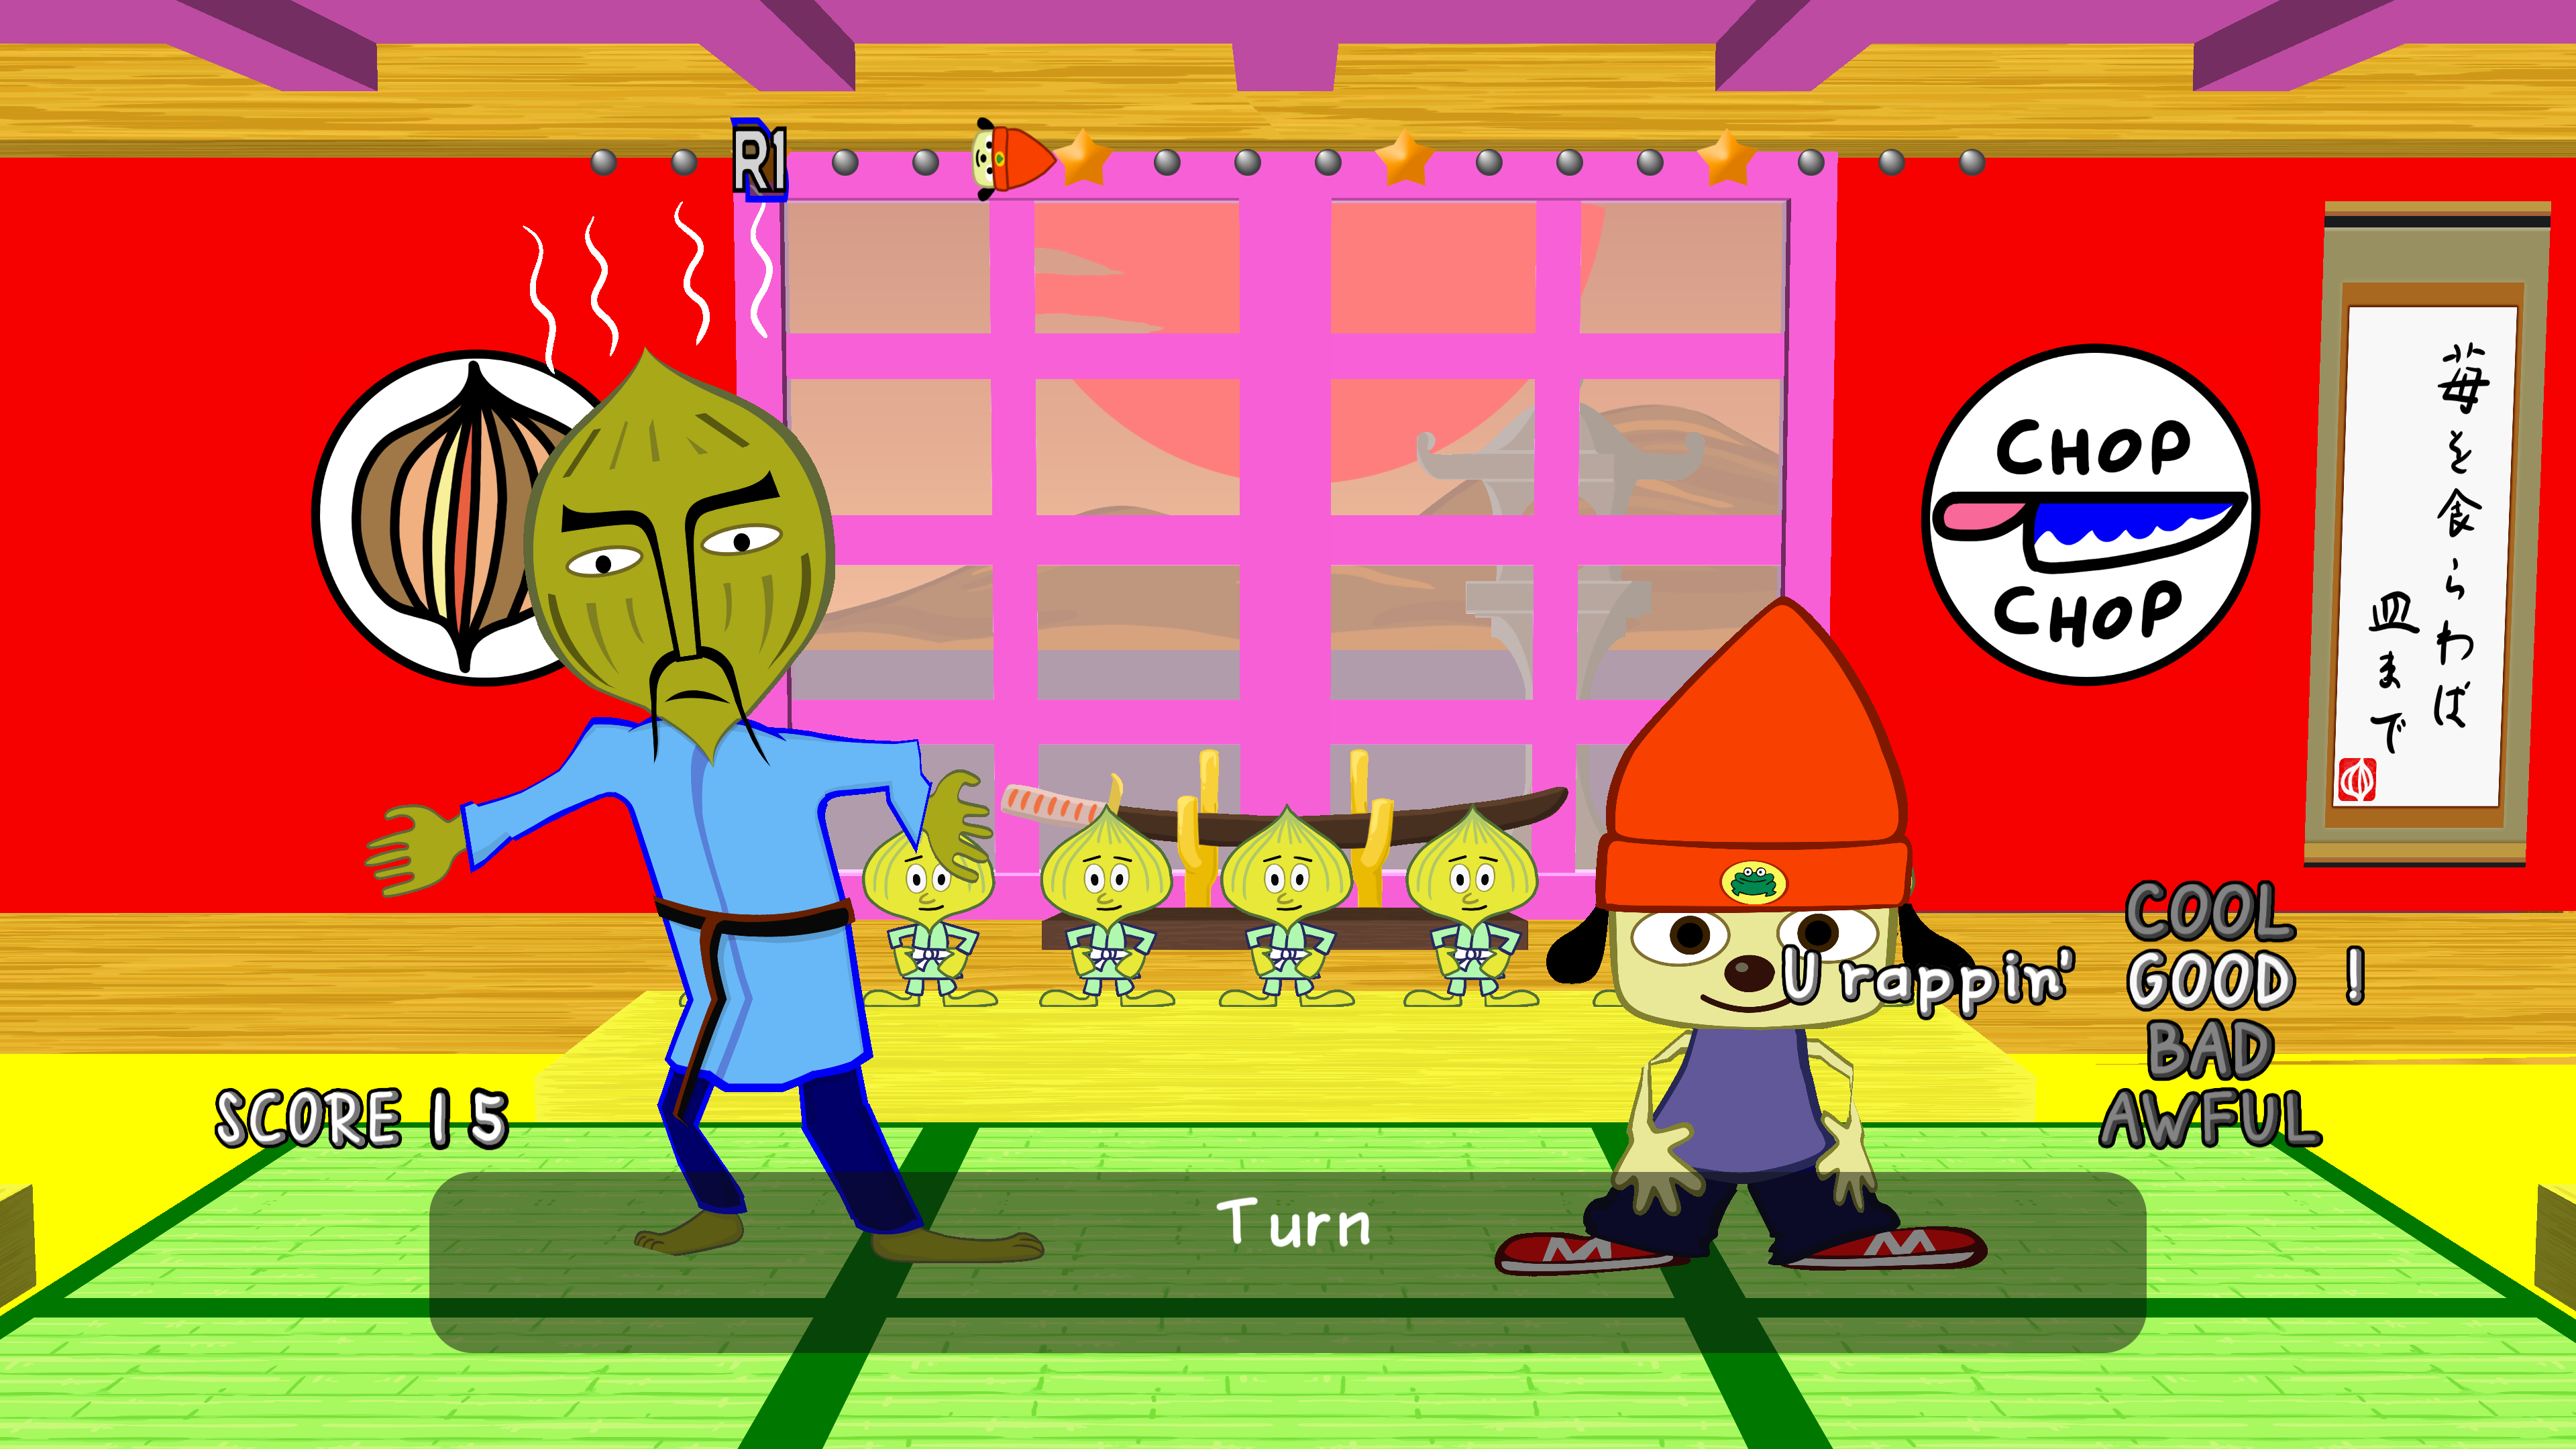 We’re So Happy Parappa The Rapper Is Back To Frustrate Us